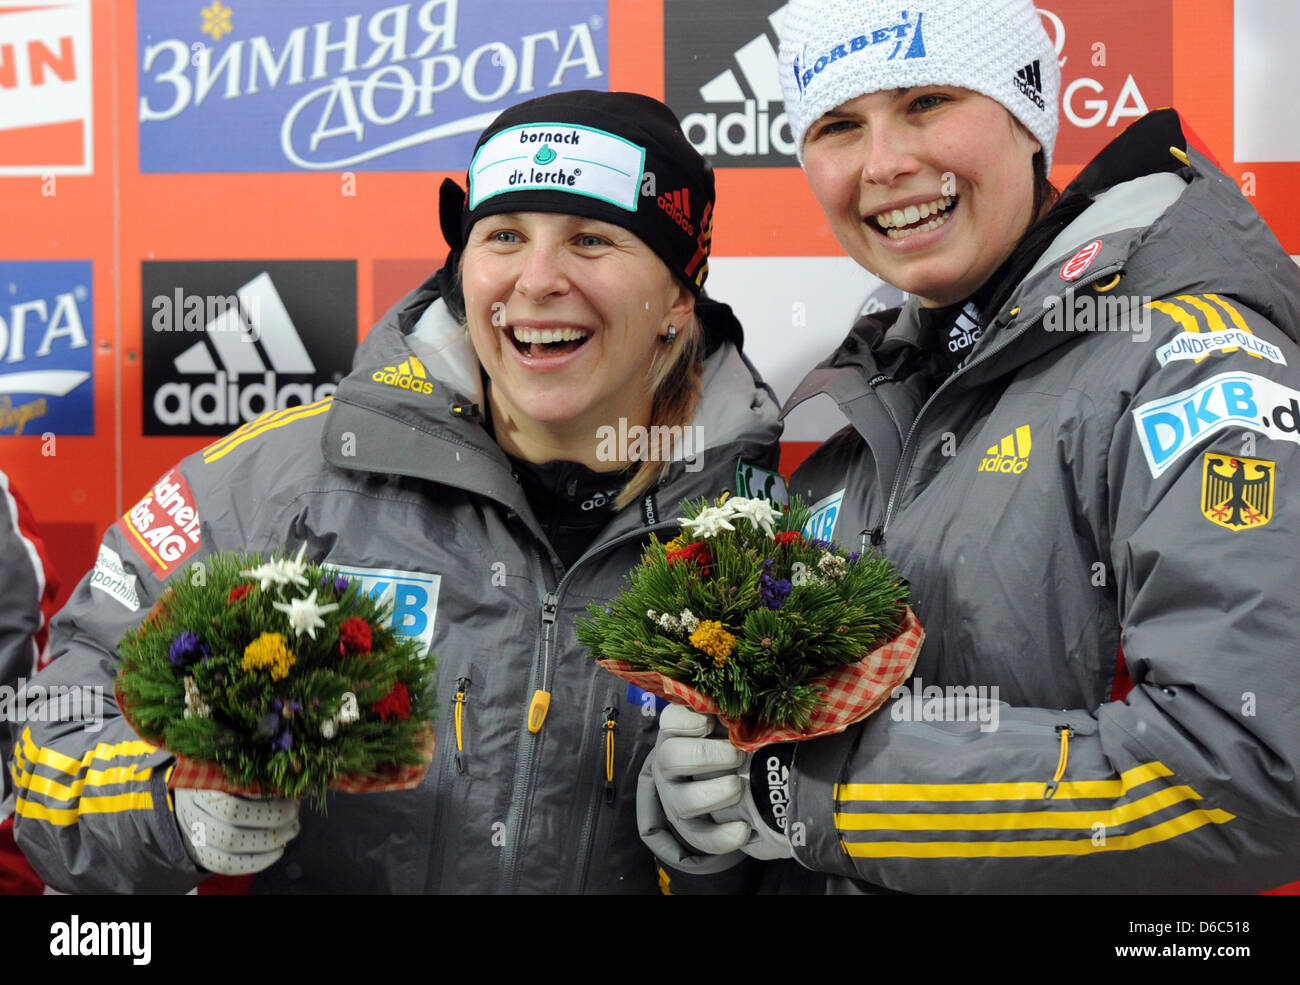 German bobsledders Cathleen Martini (L) and Berit Wiacker celebrate their victory during the awards ceremony at the women's two-person bobsleigh world cup in Koenigssee, Germany, 13 January 2012. Martini and Wiacker came in first place. Photo: TOBIAS HASE Stock Photo